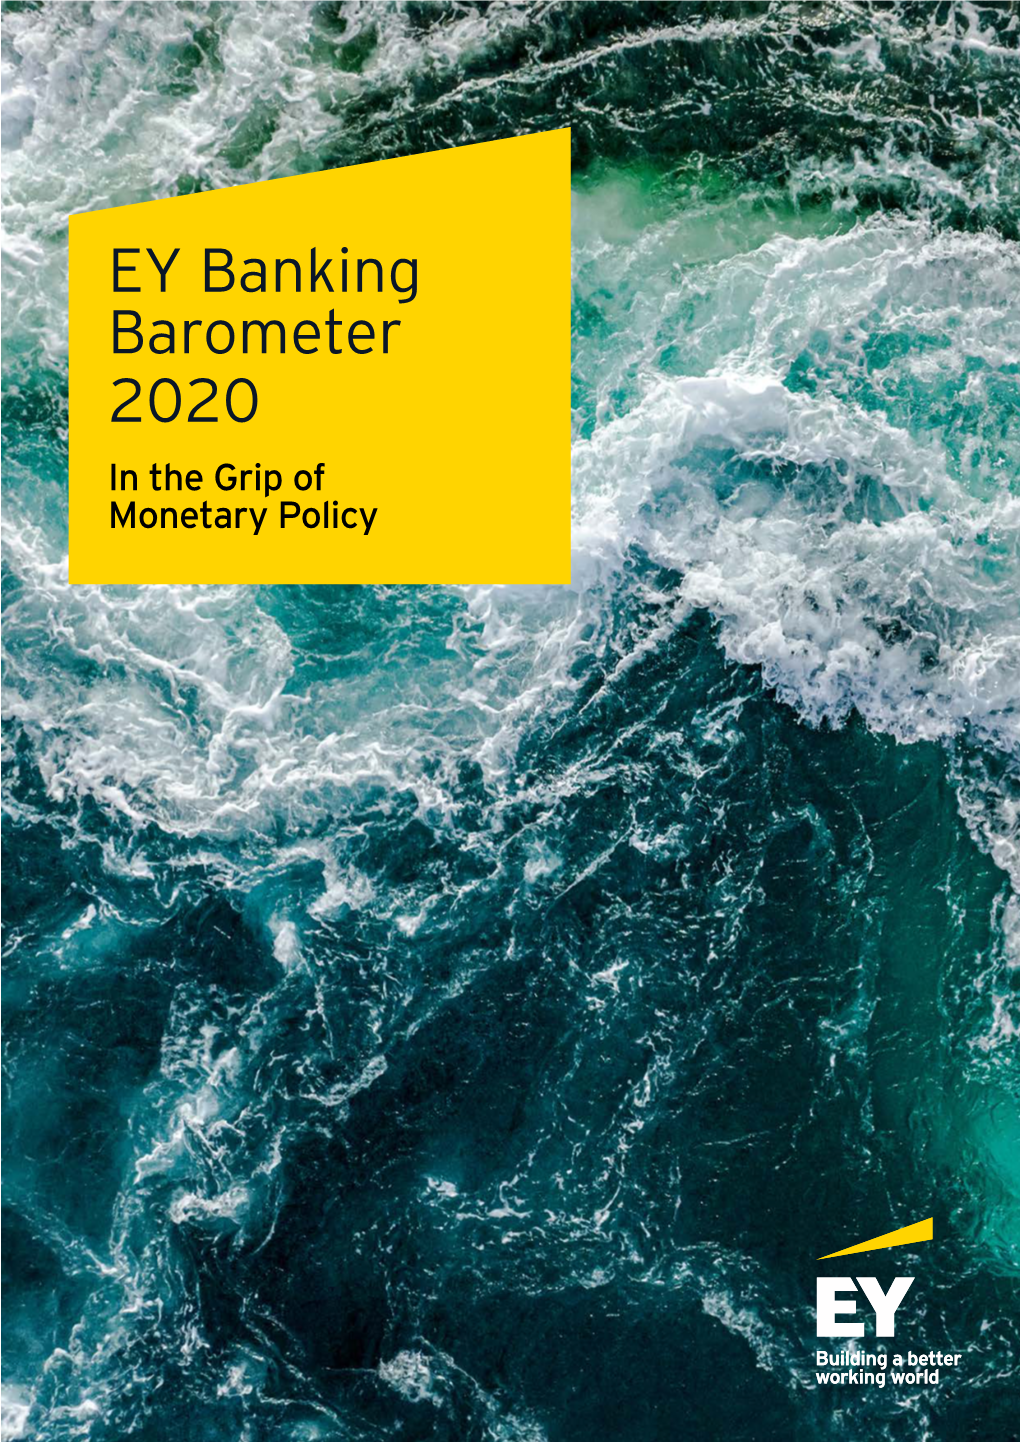 EY Banking Barometer 2020 in the Grip of Monetary Policy Table of Contents